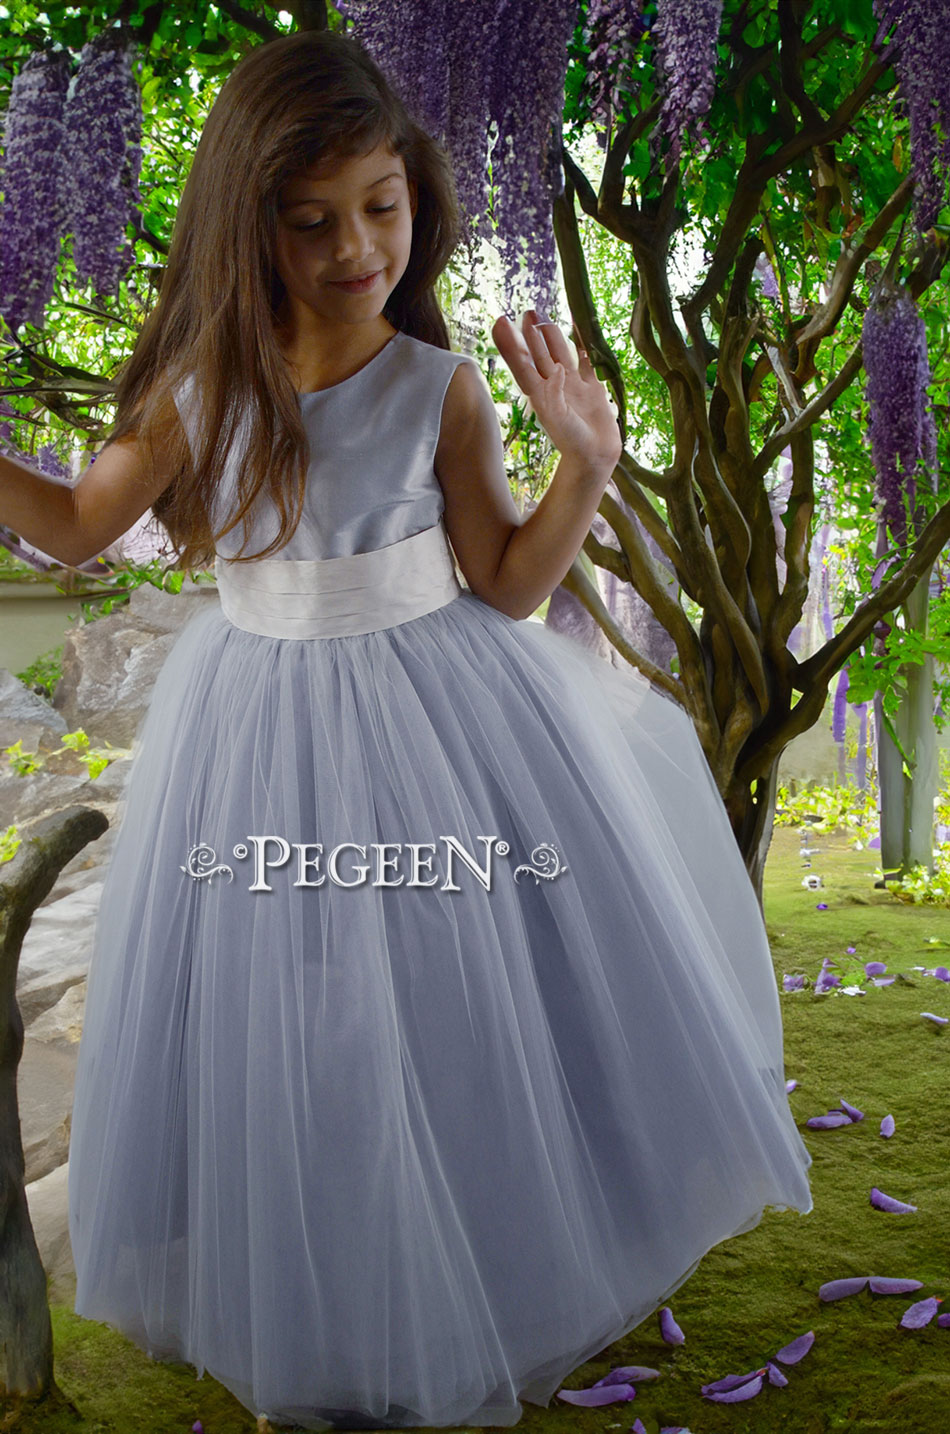 Flower Girl Dress in Lavender Tulle with Pegeen Signature Bustle